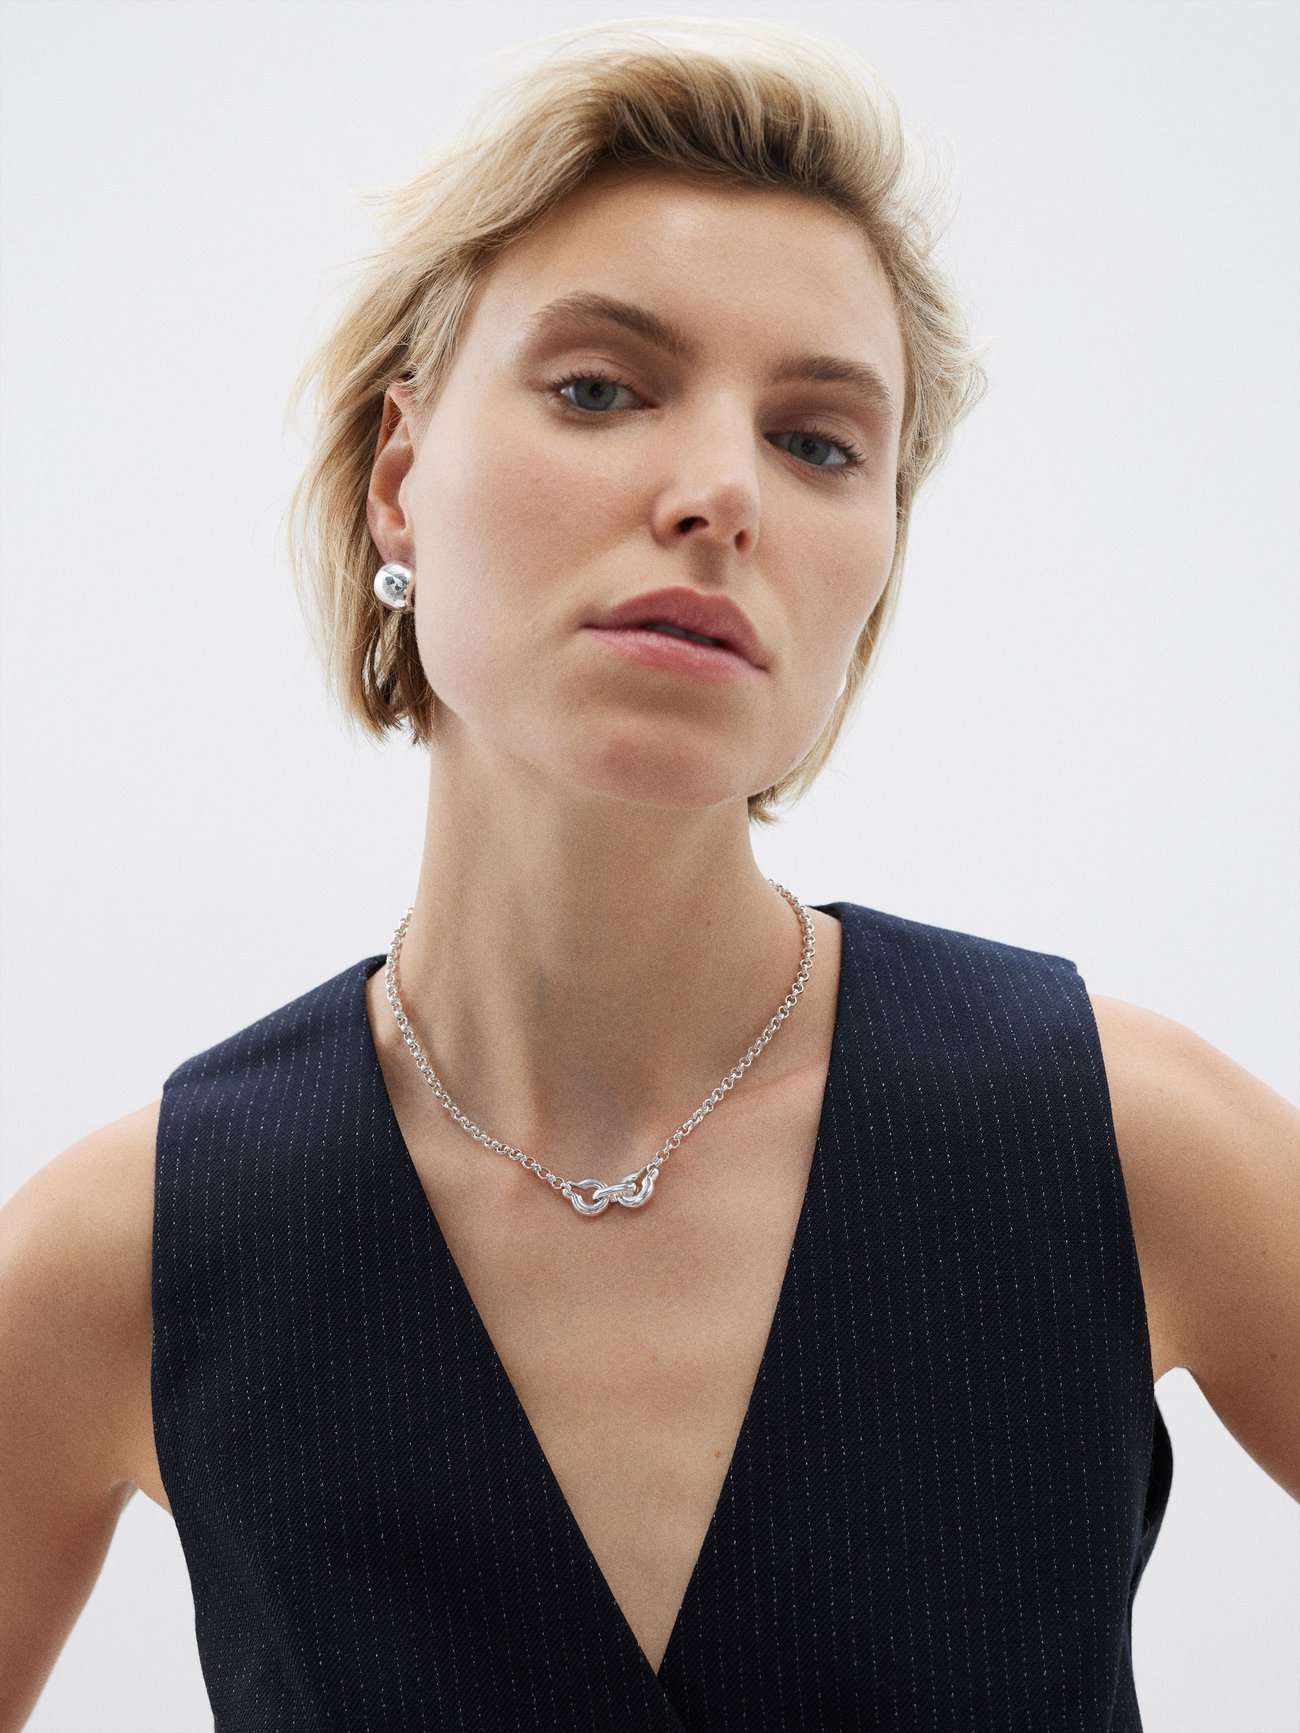 Chain and pendant mirror one another in Annika Inez's handmade sterling silver Ample Clasp necklace, shaped with rounded rolo links.